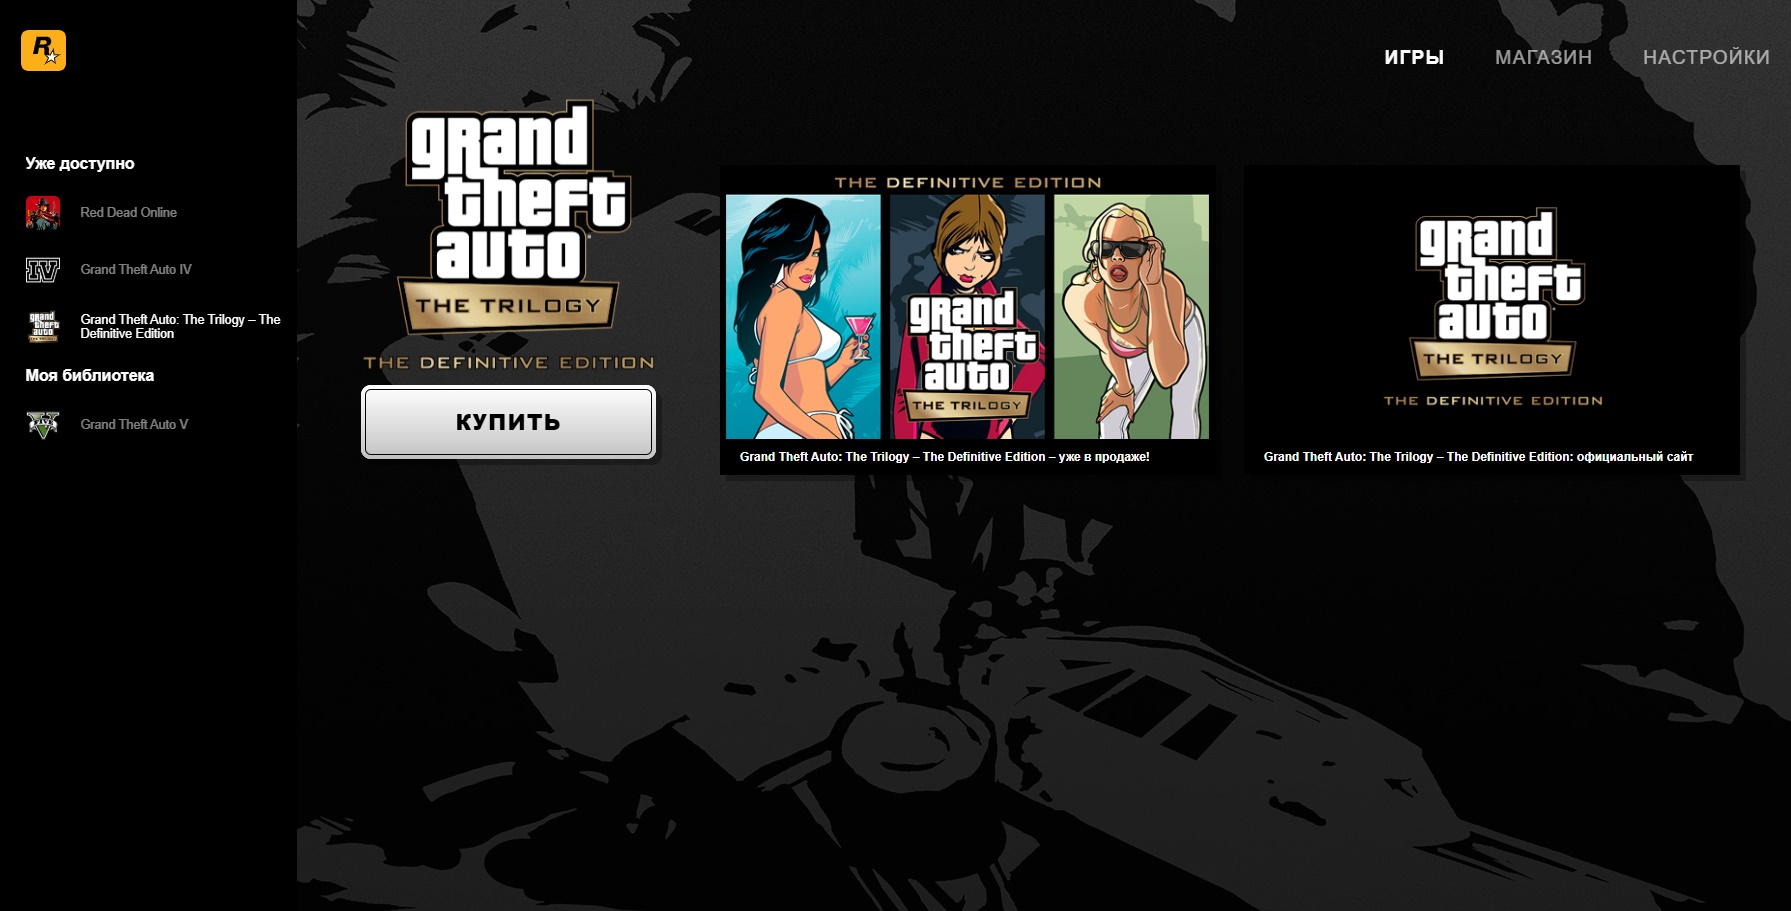 Error could not access game process shutdown rockstar games launcher and steam epic games store фото 34